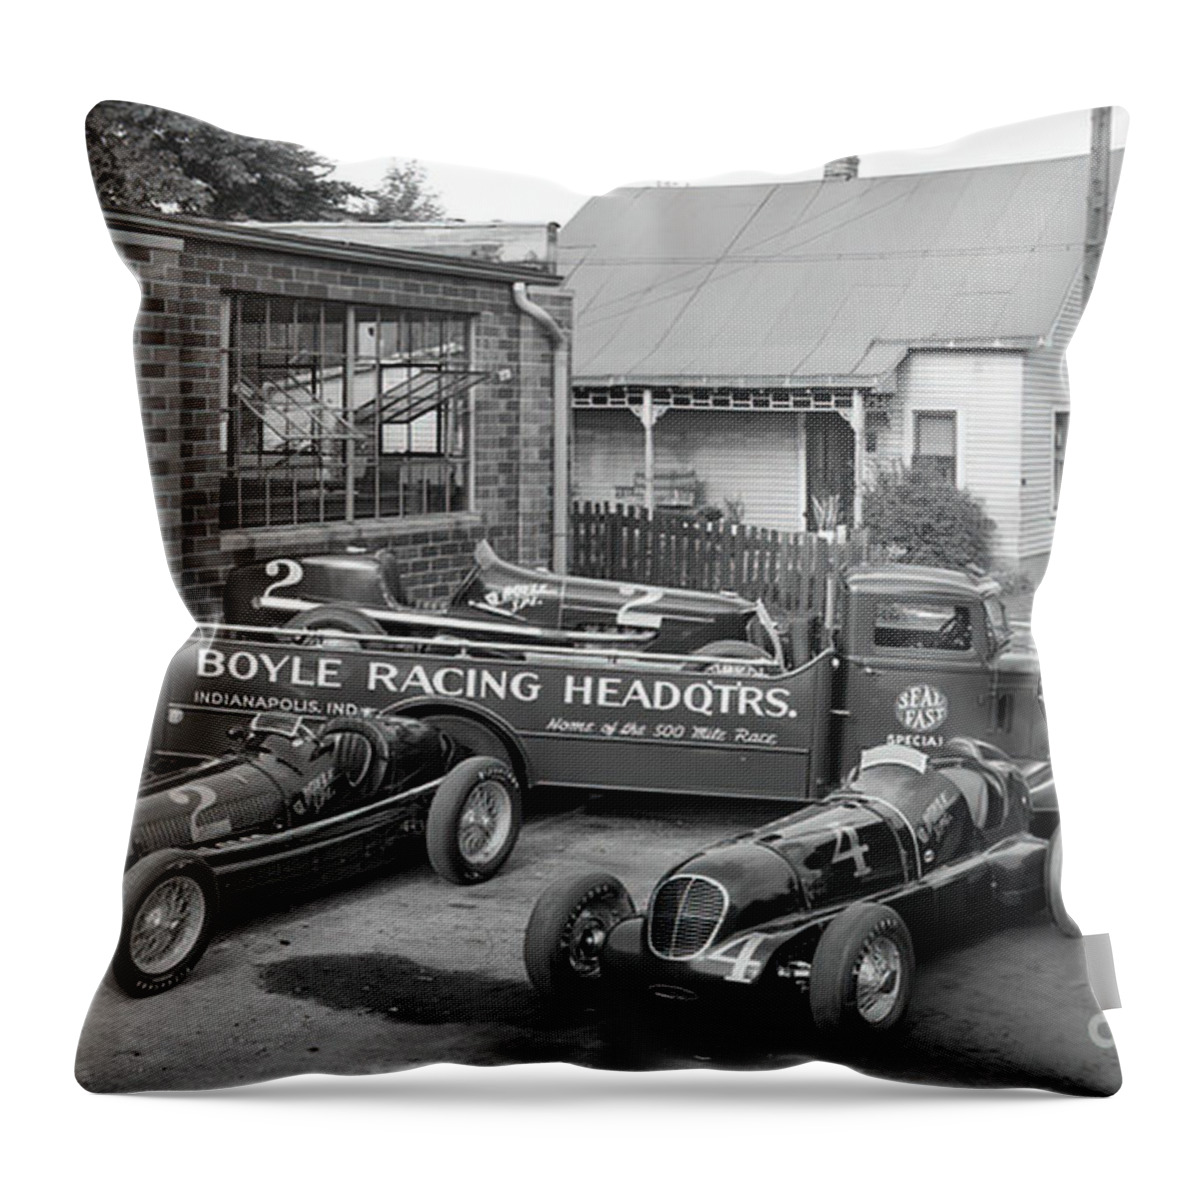 Vintage Throw Pillow featuring the photograph 1930s Boyle Racing Team And Maserati Race Cars by Retrographs